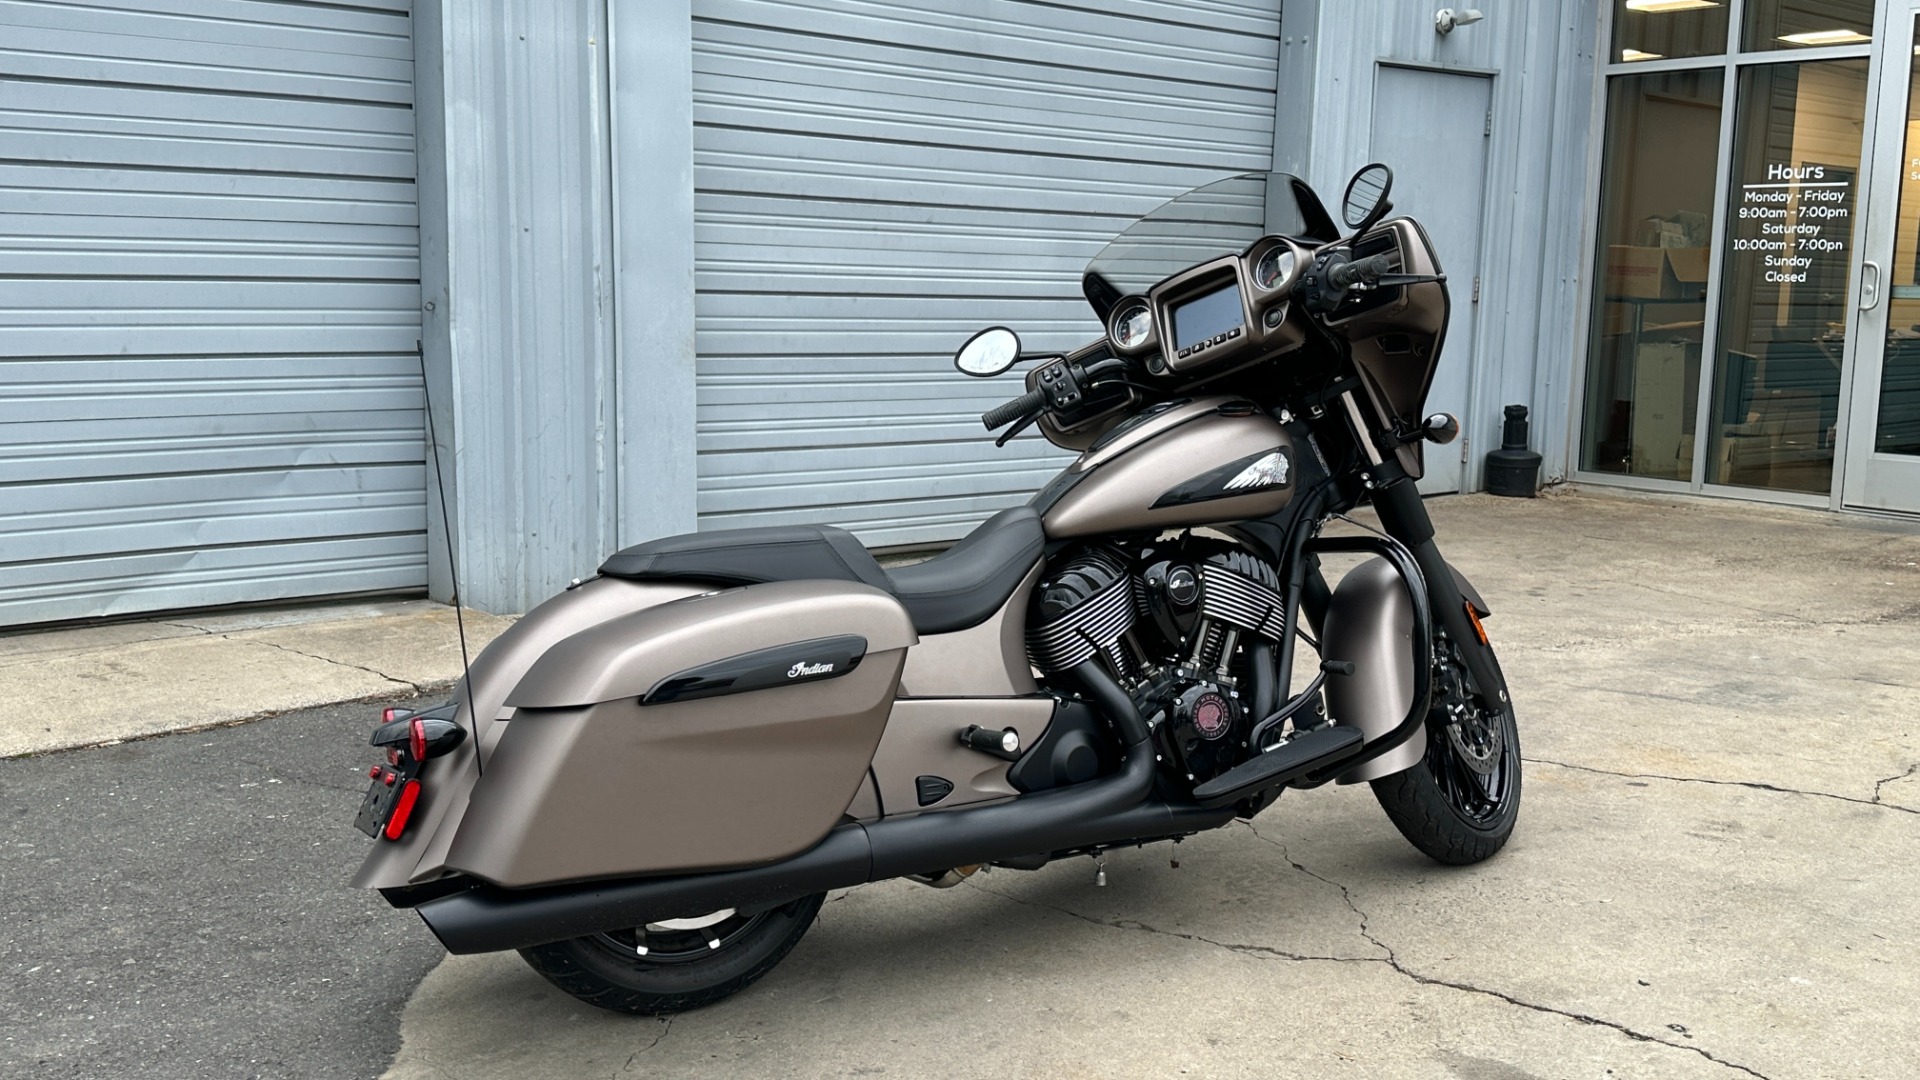 Used 2019 INDIAN CHIEFTAIN DARK HORSE / MATTE PAINT / LOW MILES / NAV / CRUISE CONTROL / TOUCHSCREEN for sale $23,999 at Formula Imports in Charlotte NC 28227 3